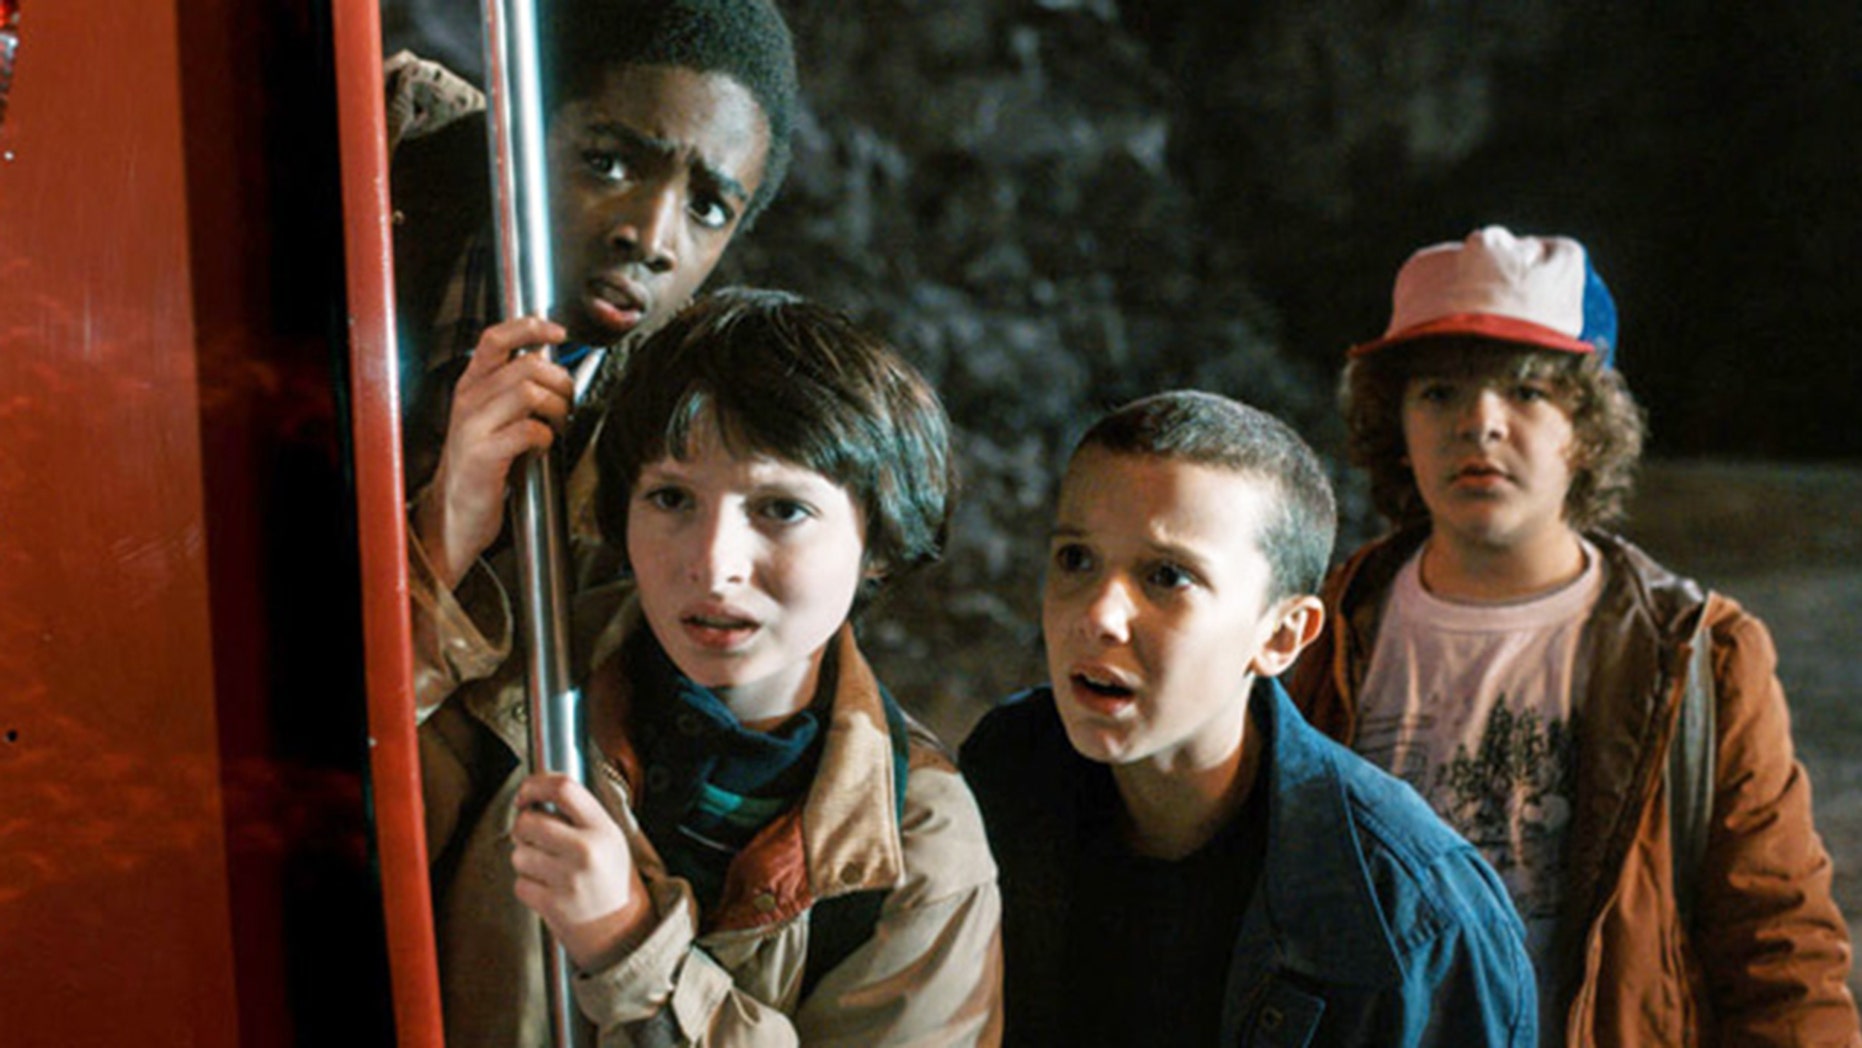 Stranger Things Casting Call Looking For Marching Band Extras